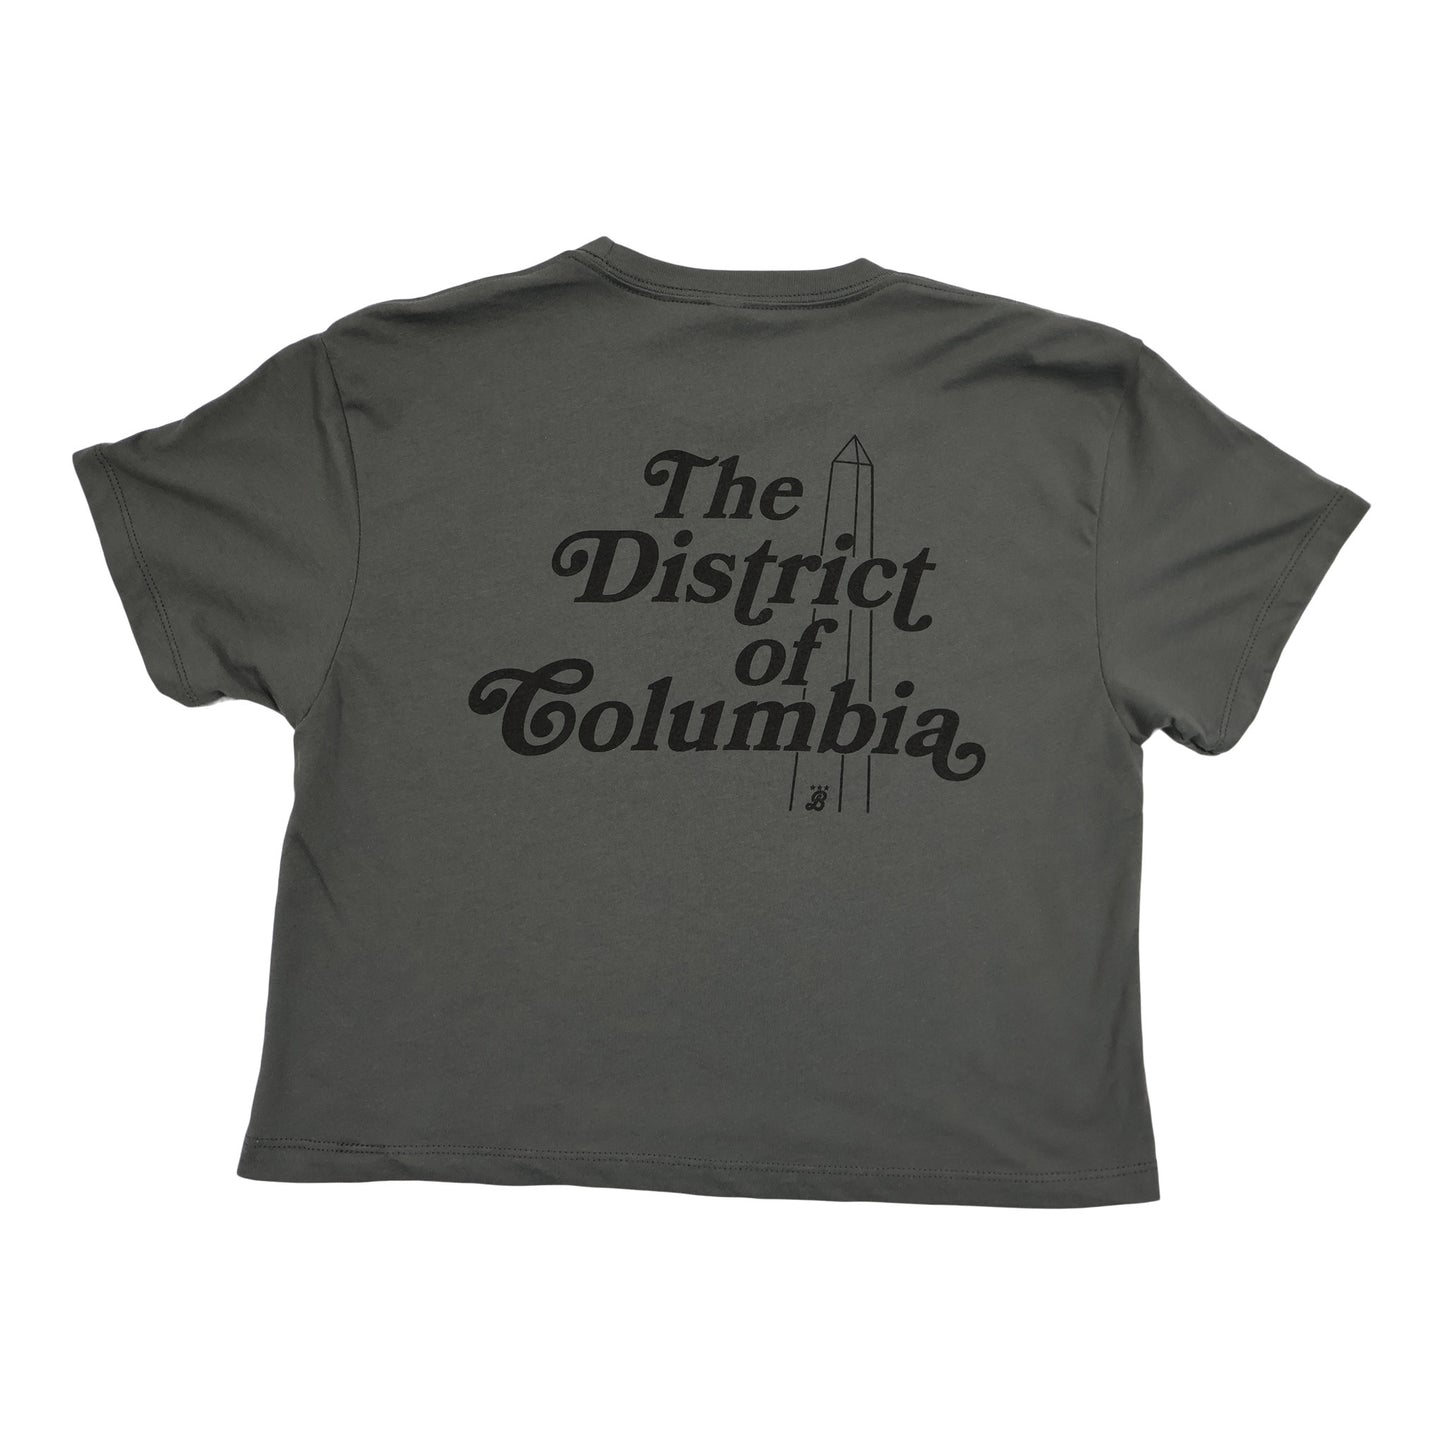 Ladies 'The District of Columbia' double-sided Crop Top